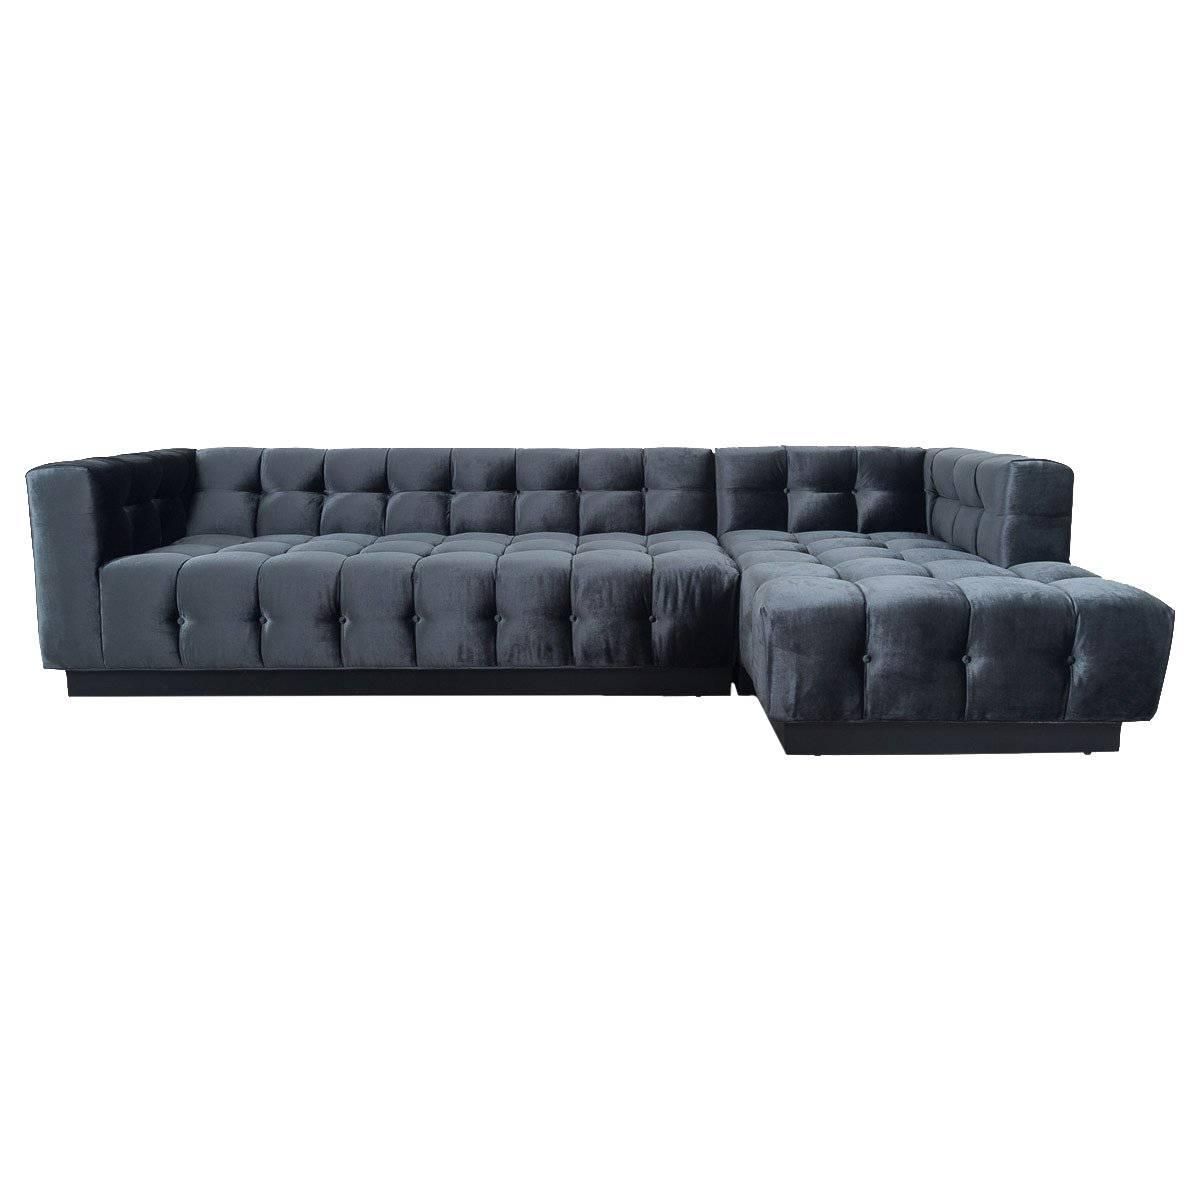 Most Recently Released Lucite Sectional Sofas – 8 For Sale At 1stdibs With Regard To Delano Smoke 3 Piece Sectionals (View 16 of 20)